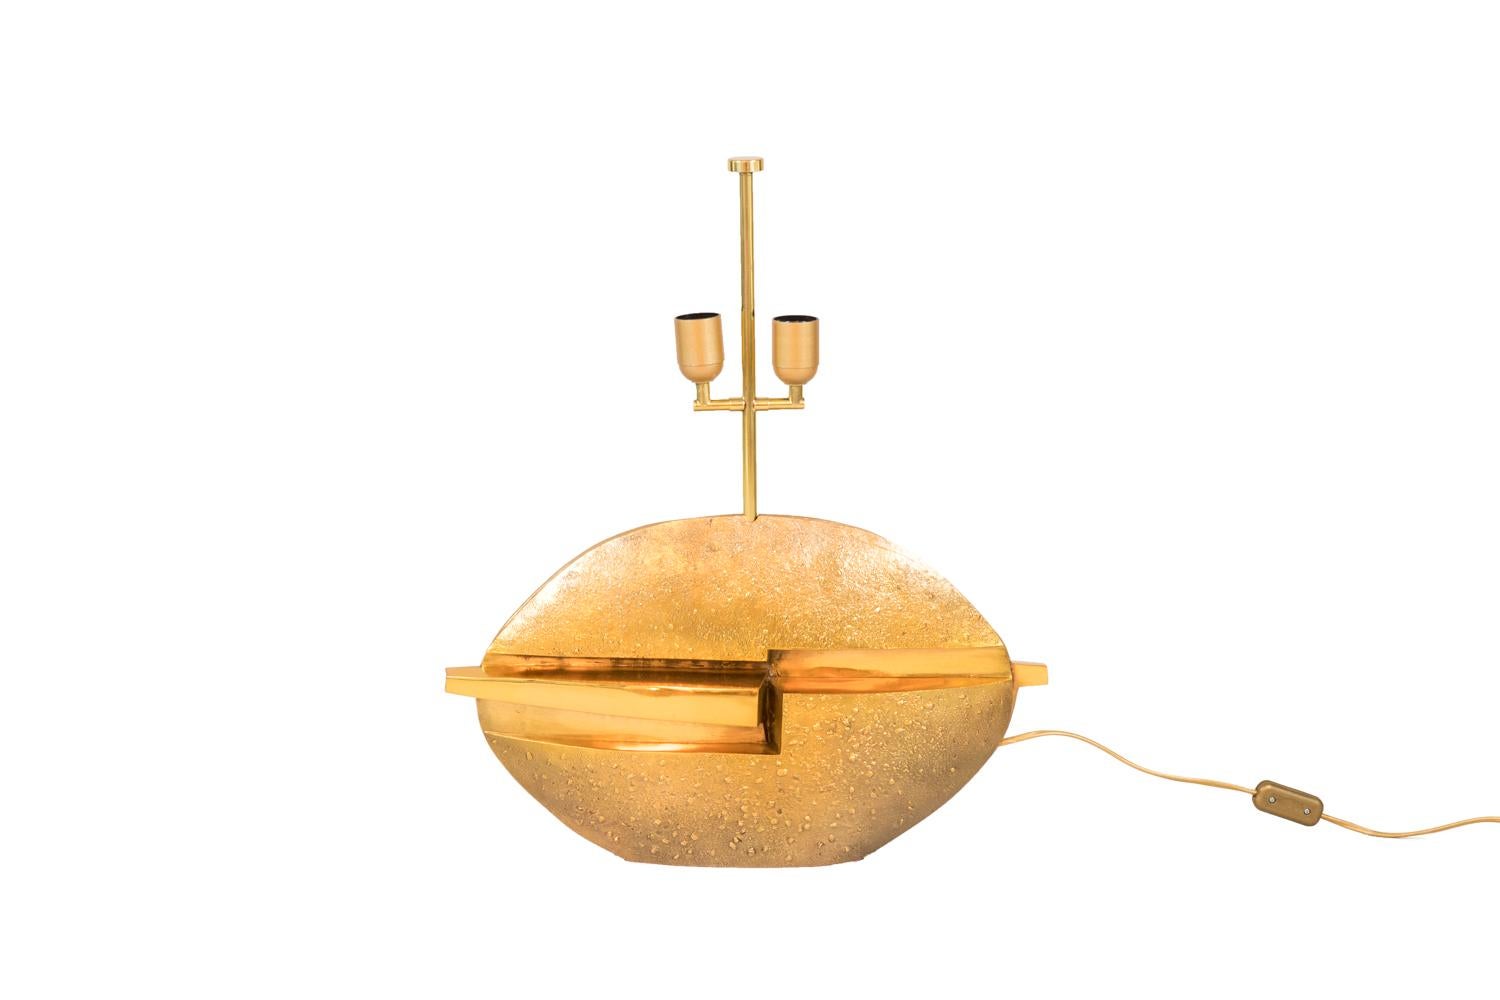 Pragos, signed.
Oval shape lamp in gilt bronze with a granulated surface. Smooth decor of a centered hollow in the whole lamp width and a left projection, on both sides.

Signed Pragos/3.

Work realized in the 1970s.

New and functional